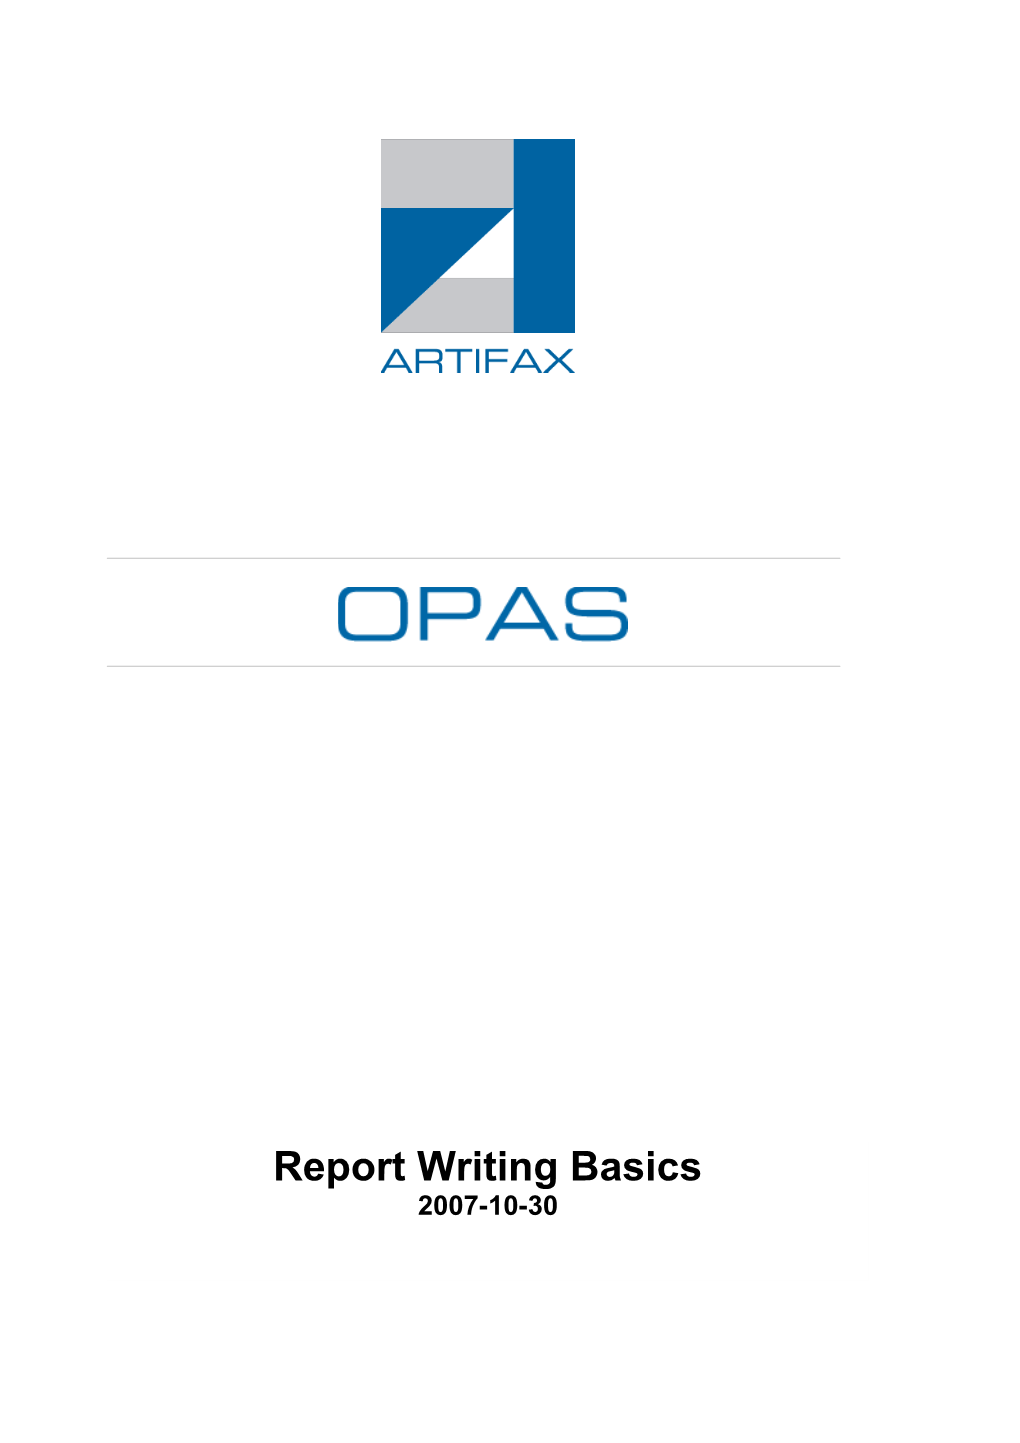 Report Writing for Artifax Event 3